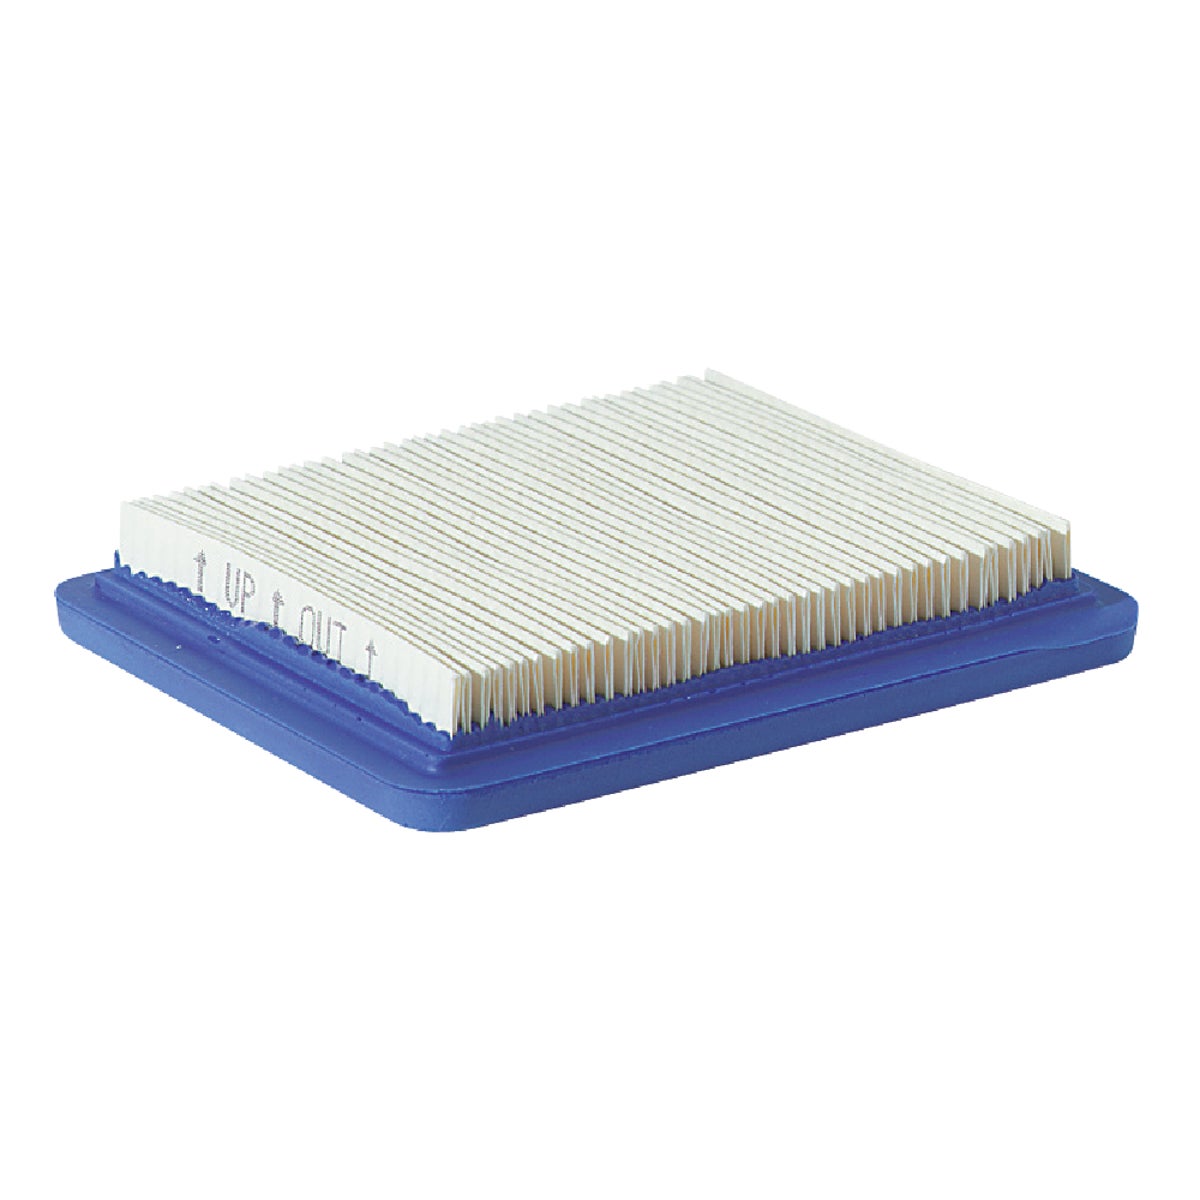 Item 758861, Briggs &amp; Stratton air filter fits 3.5 to 6.